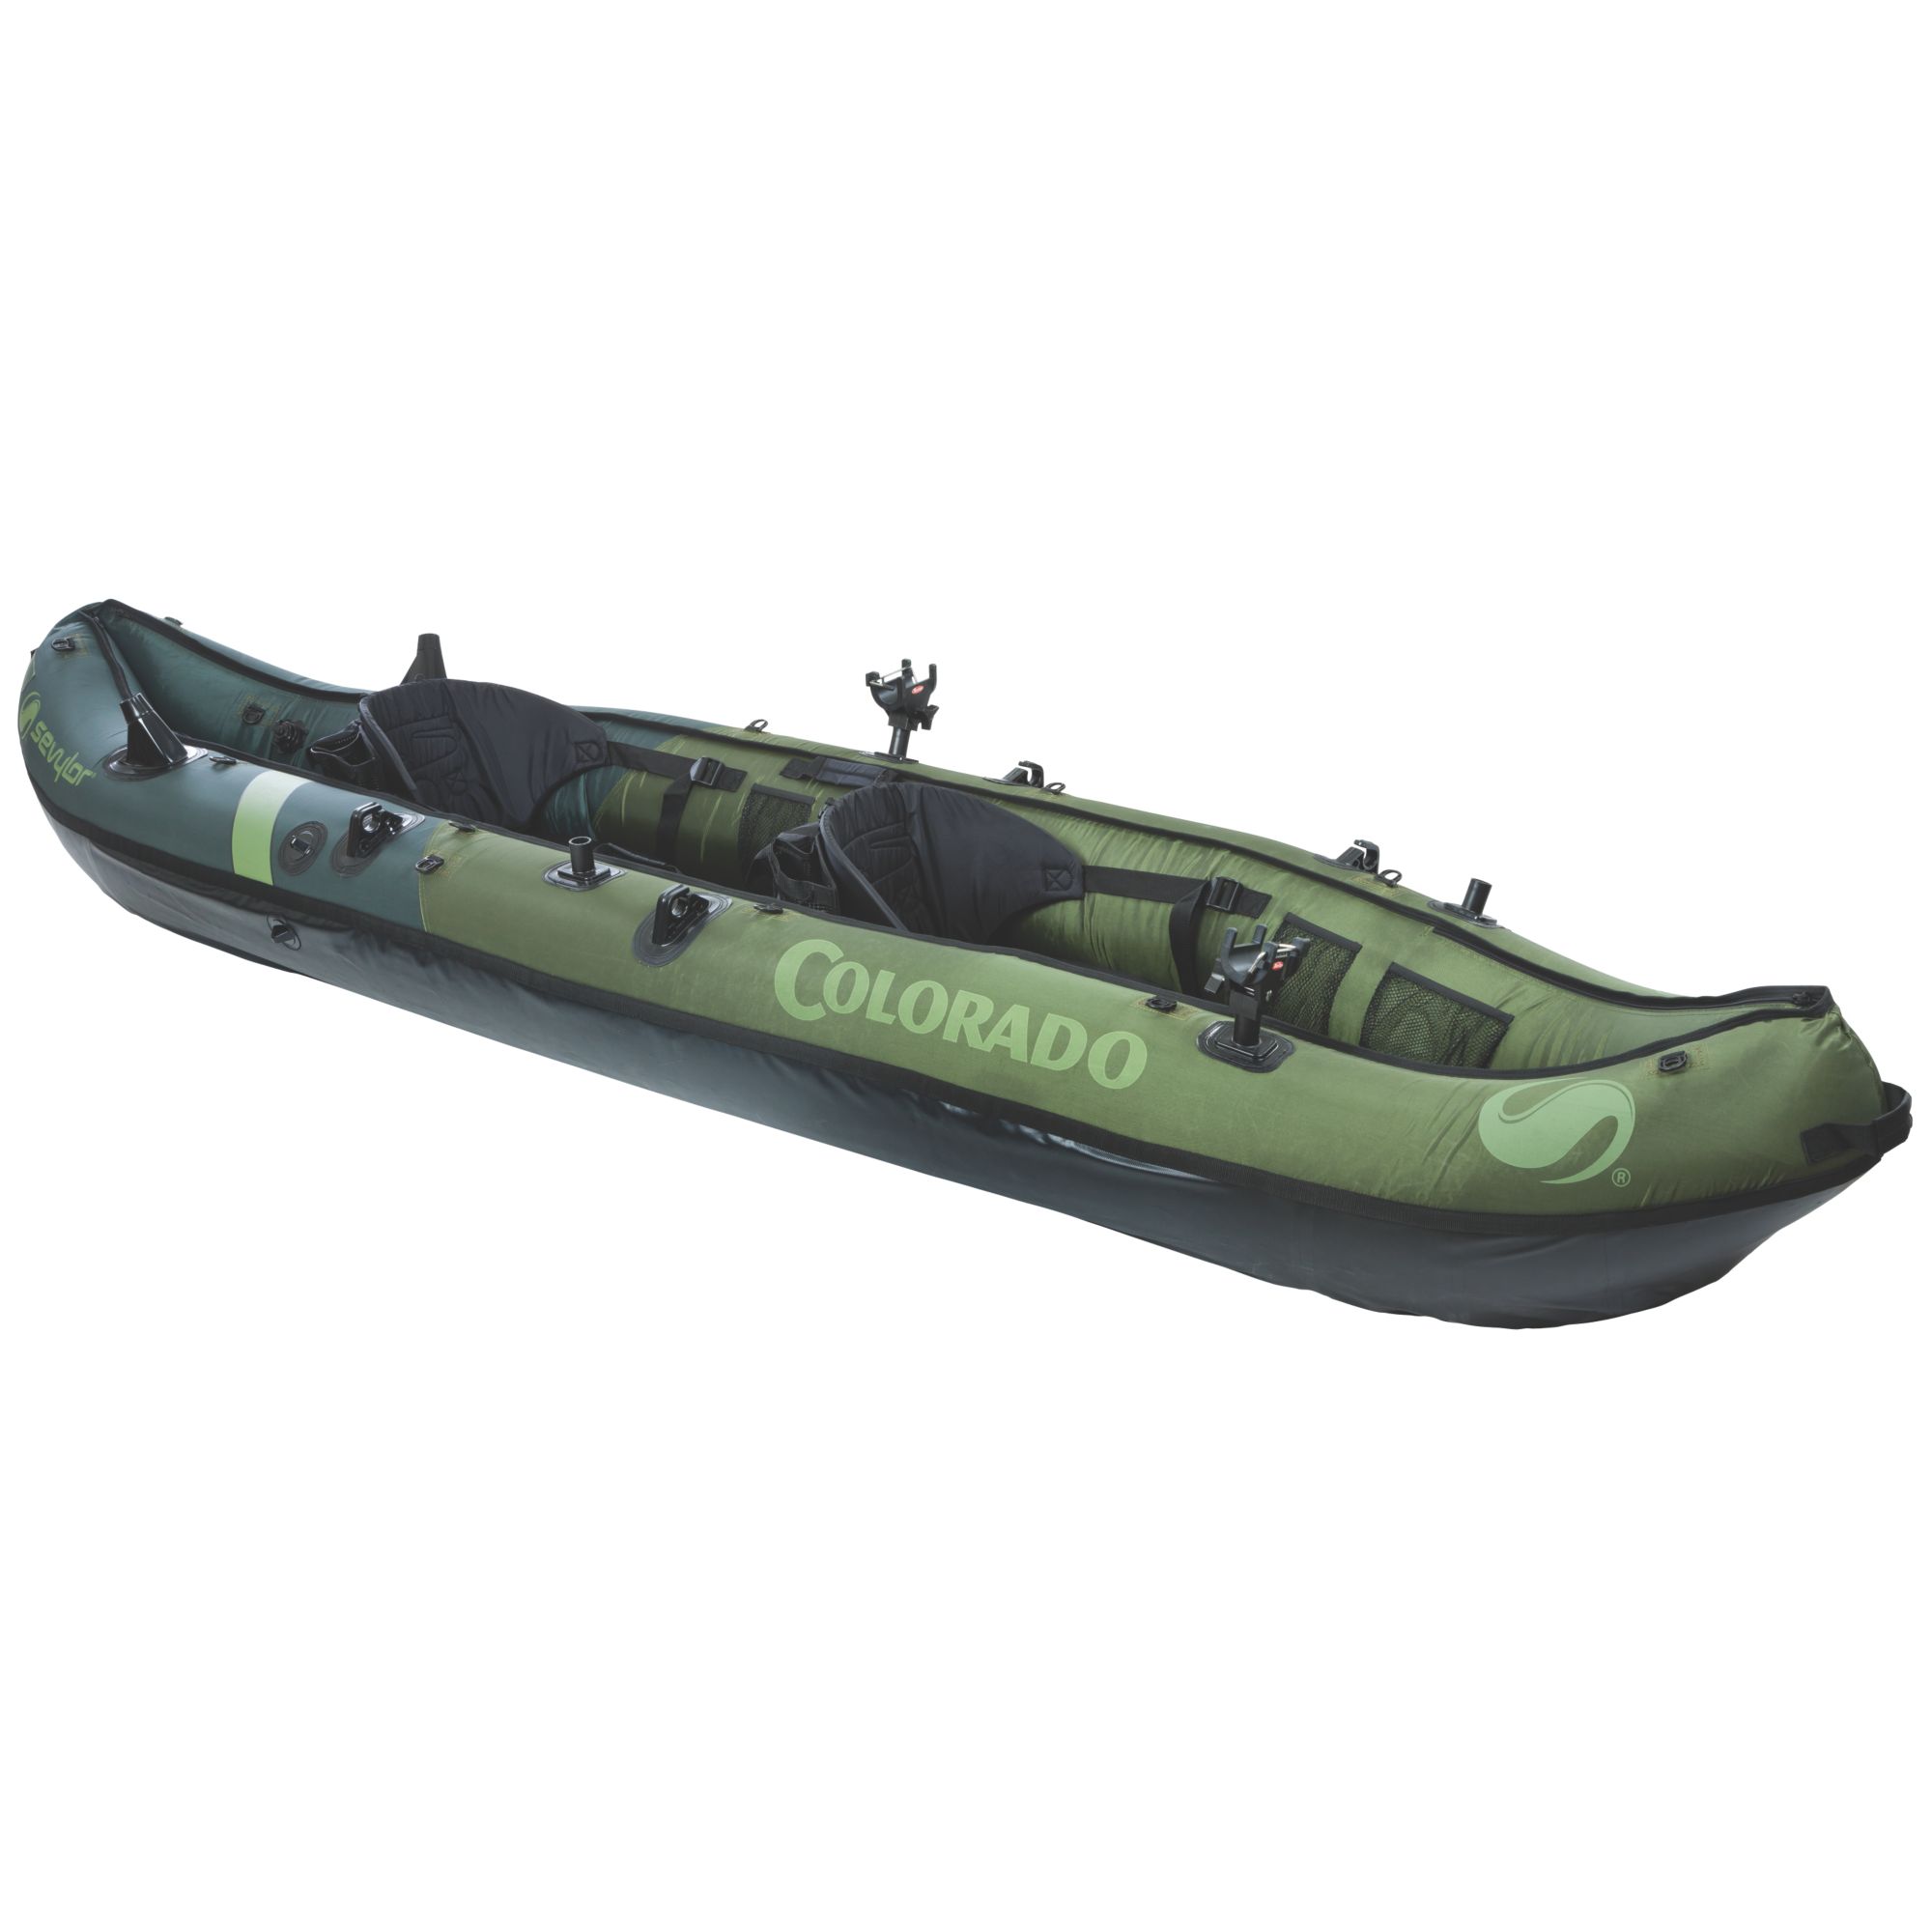 Sevylor Coleman Colorado 2-person fishing kayak for Sale in McDonald, PA -  OfferUp